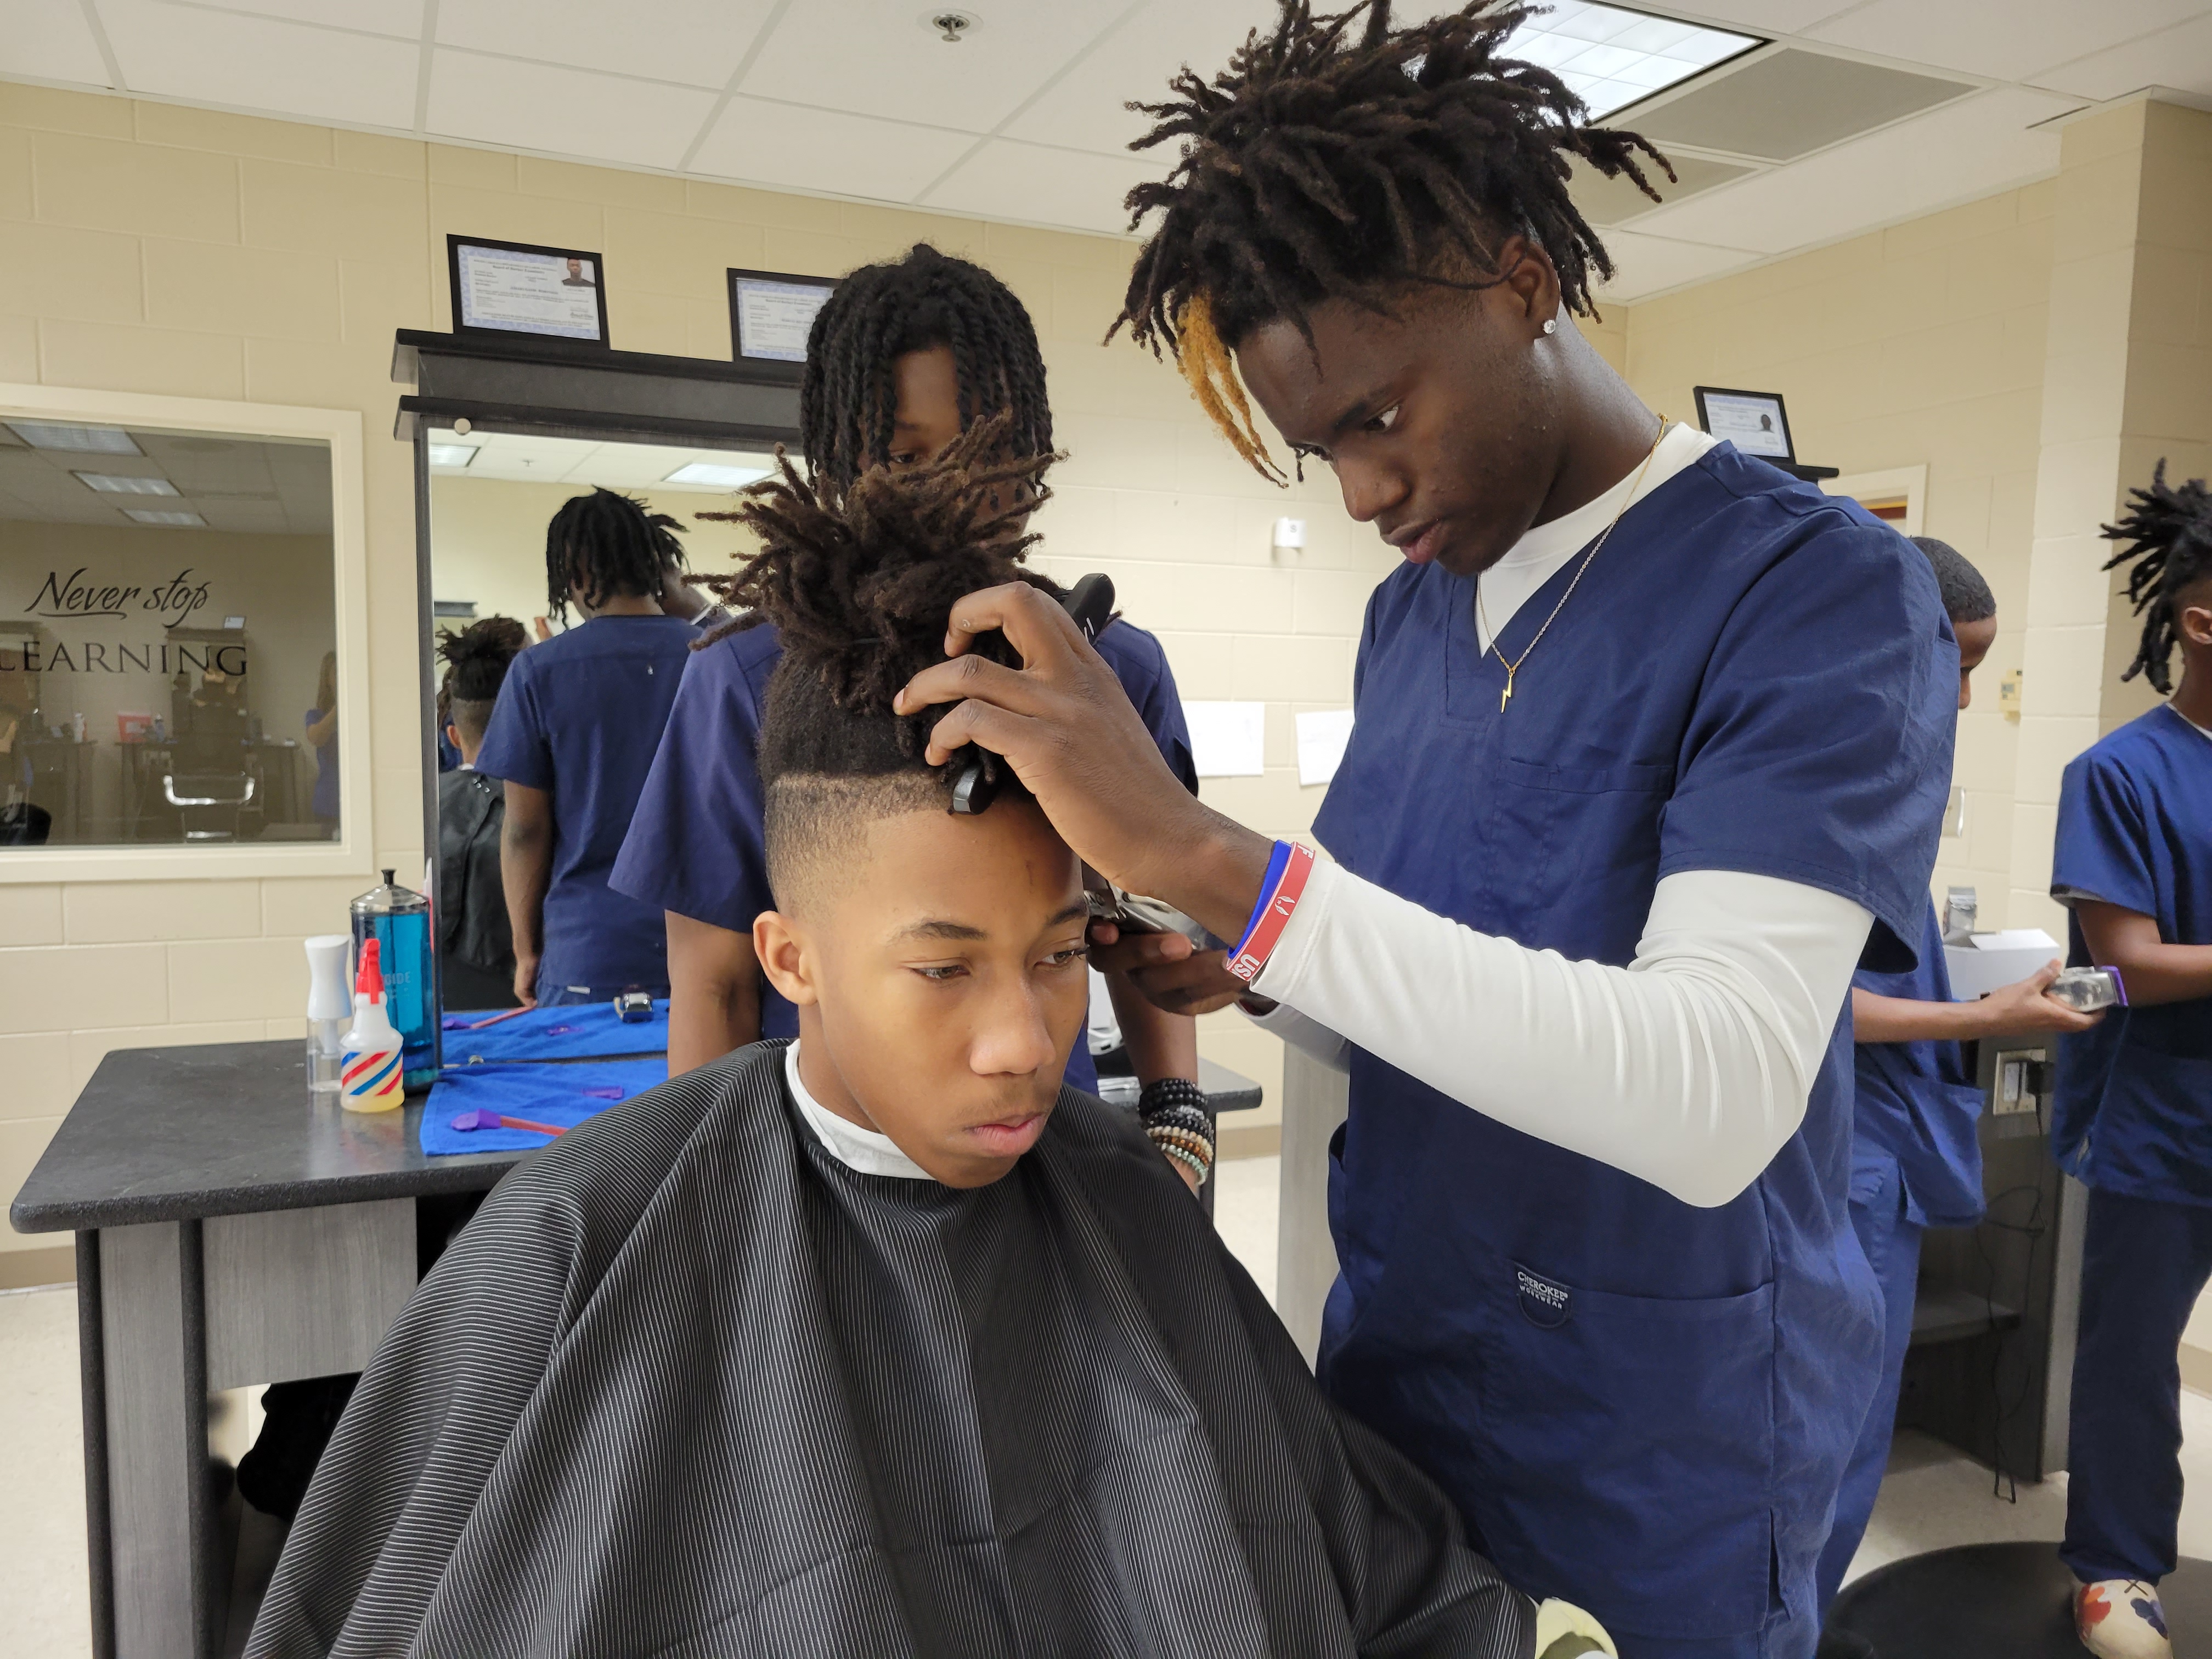 This Is Carolina: Students get an edge up on barbering